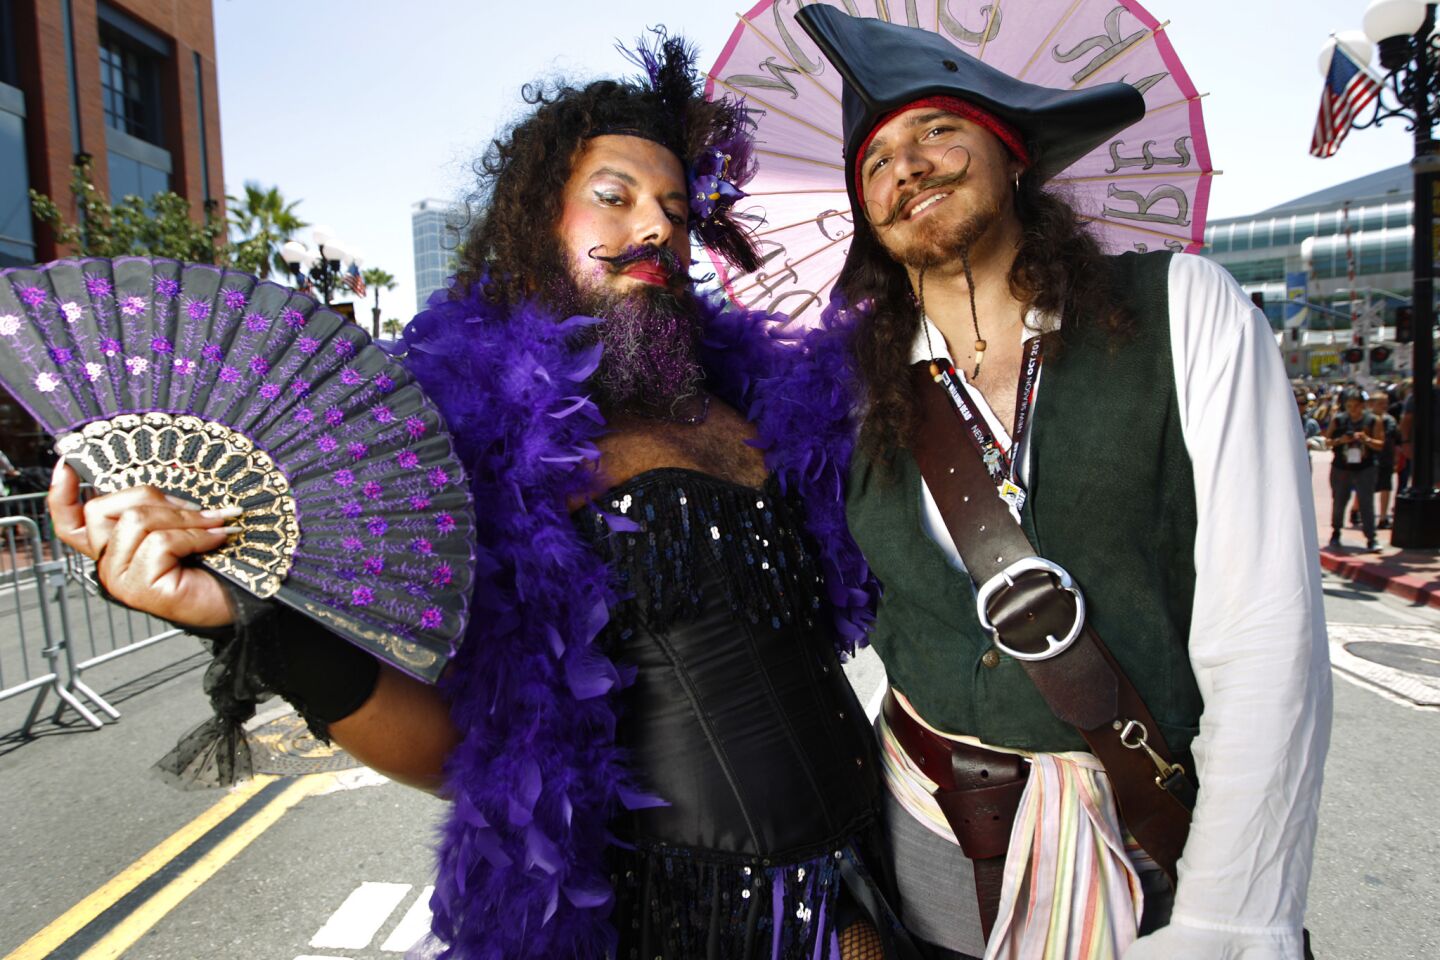 Alberto Hurtado is dressed as Iris the Bearded Lady Freakshow and Ron Majji is Capt. Jack Sparrow at Comic-Con International in San Diego on Thursday.